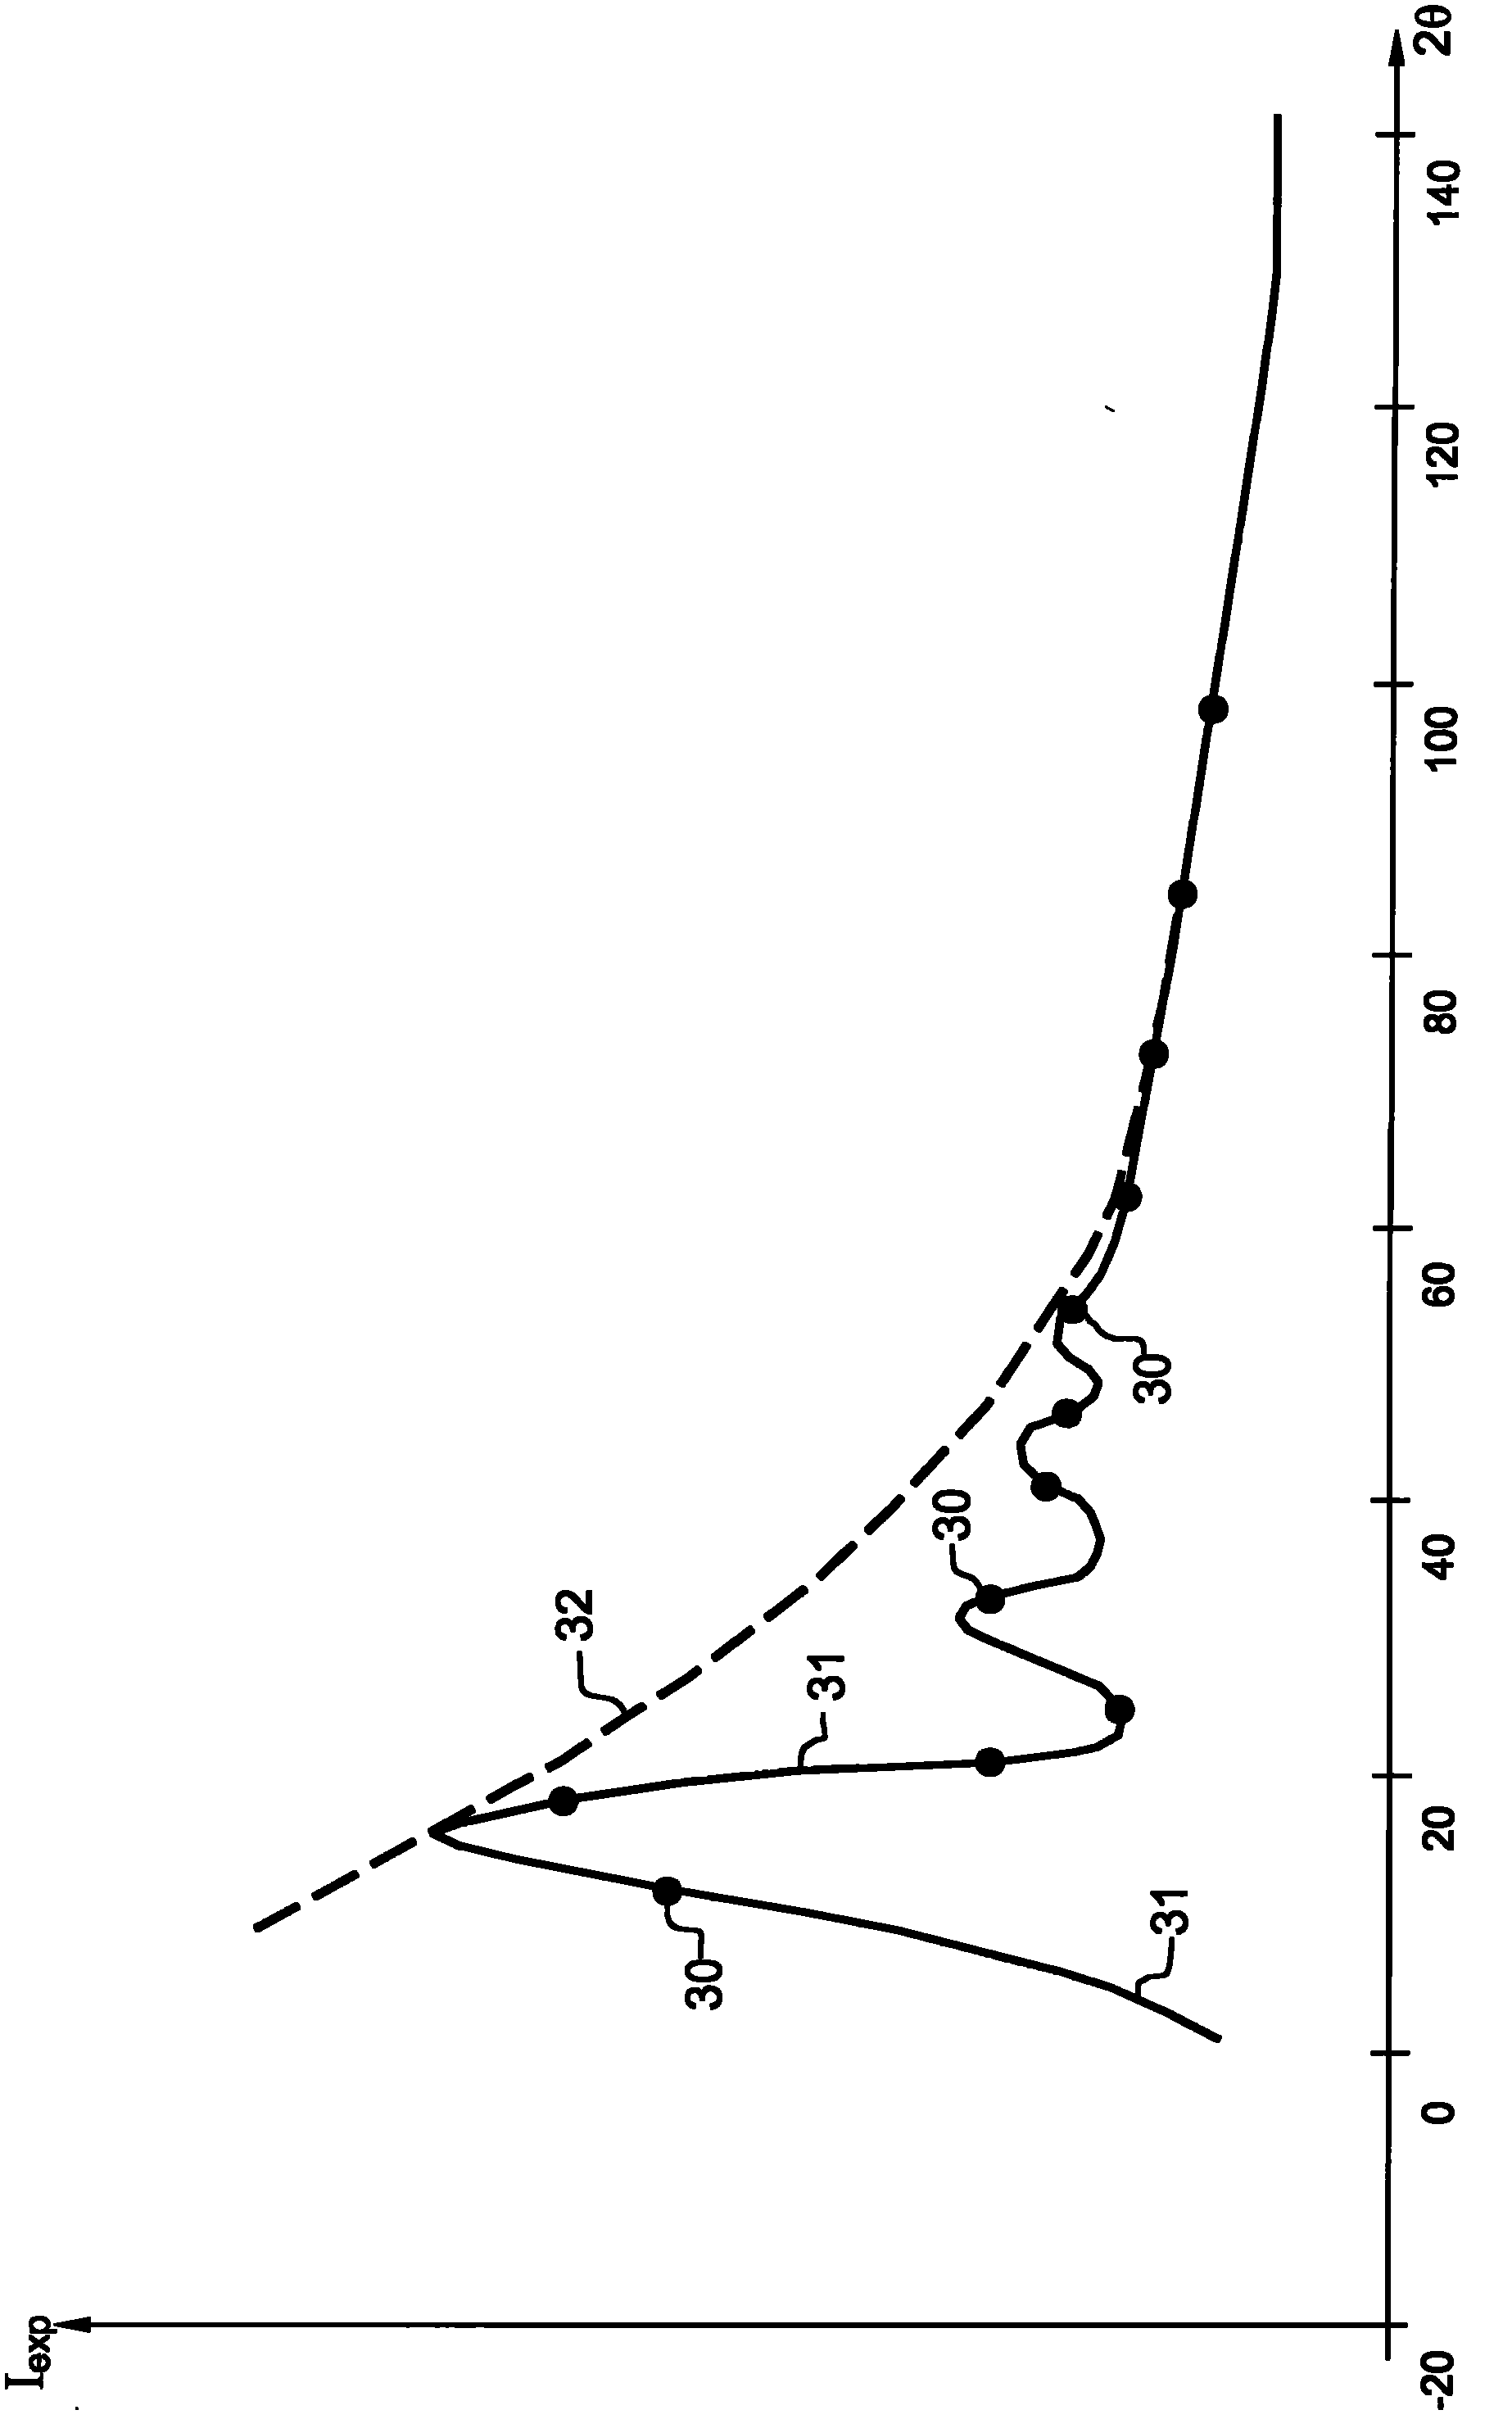 Method for obtaining a structure factor of an amorphous material, in particular amorphous glass